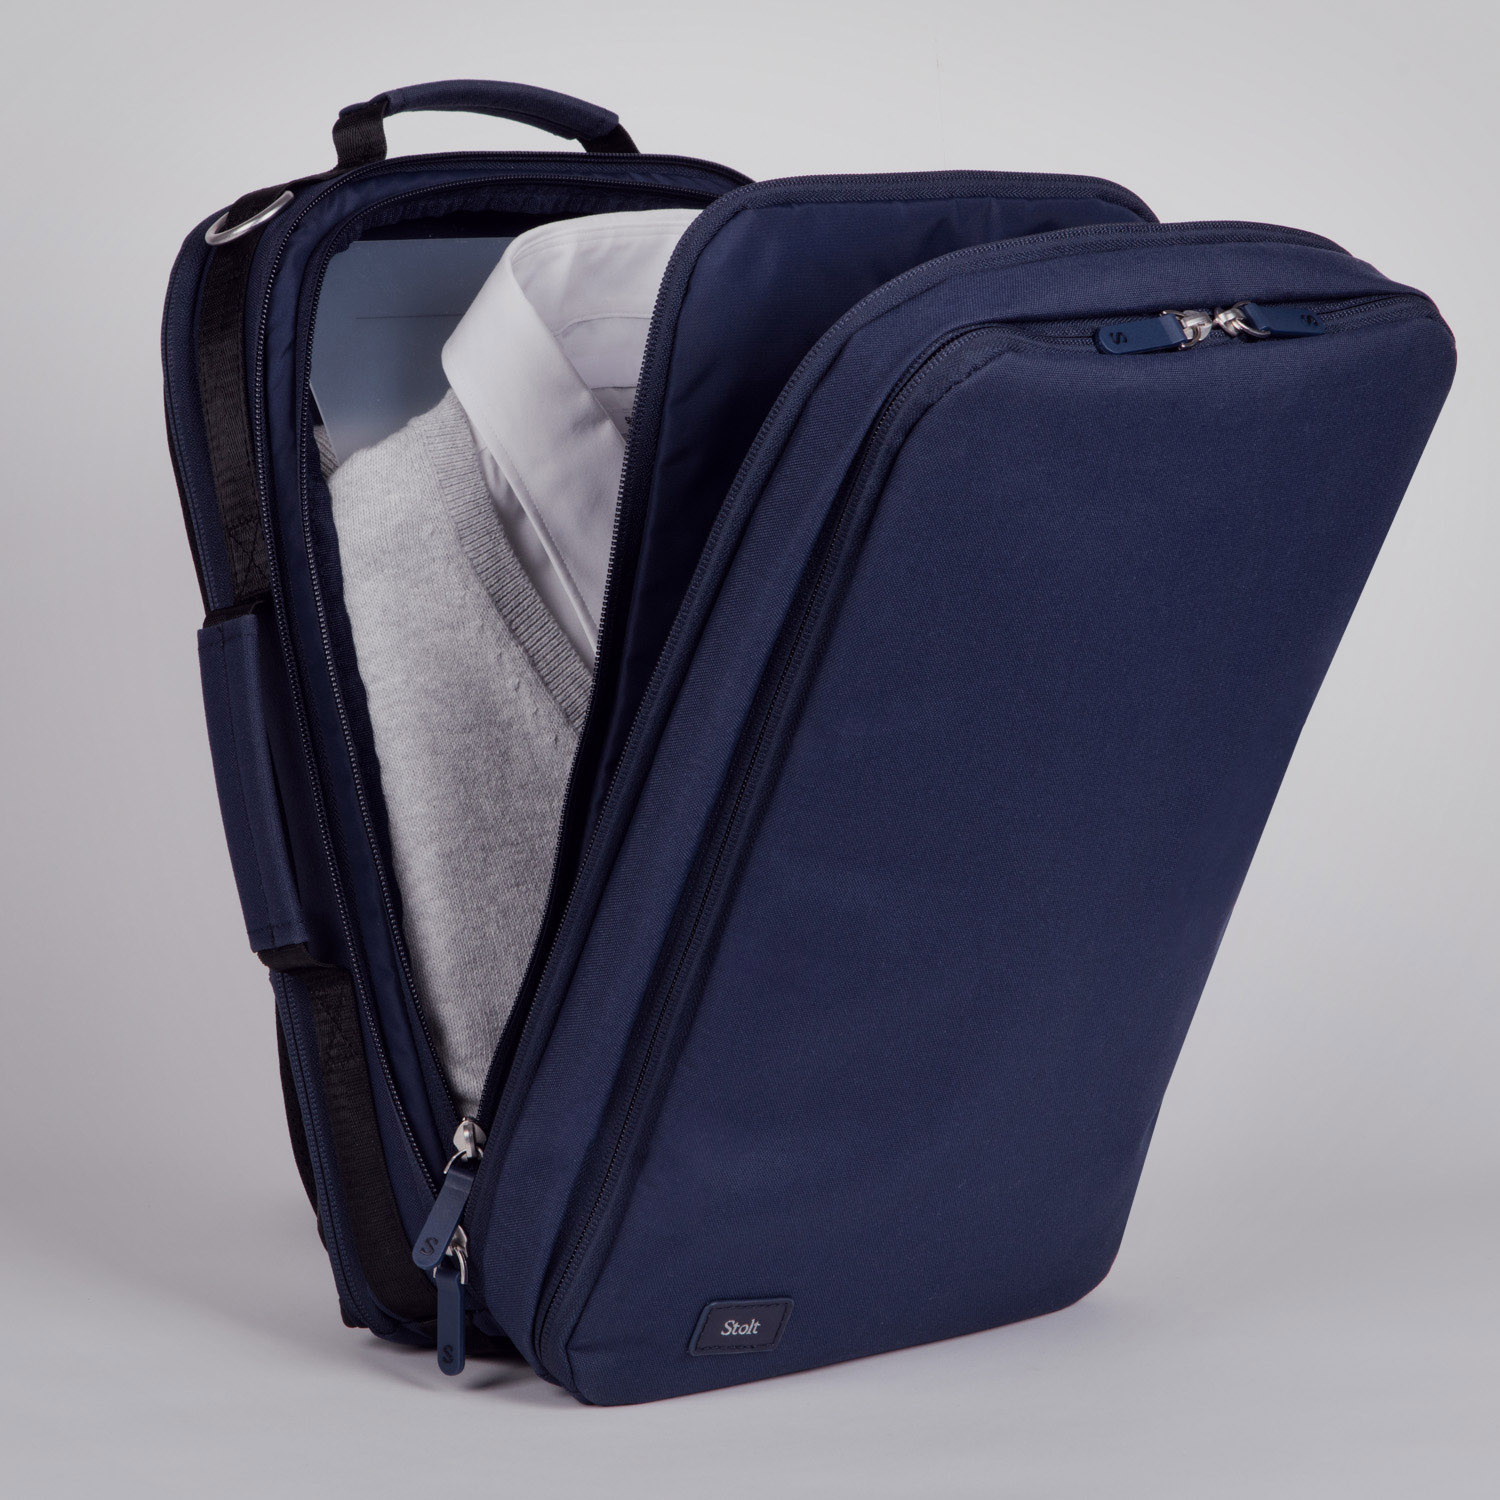 Stolt Podium small commuter backpack in blue